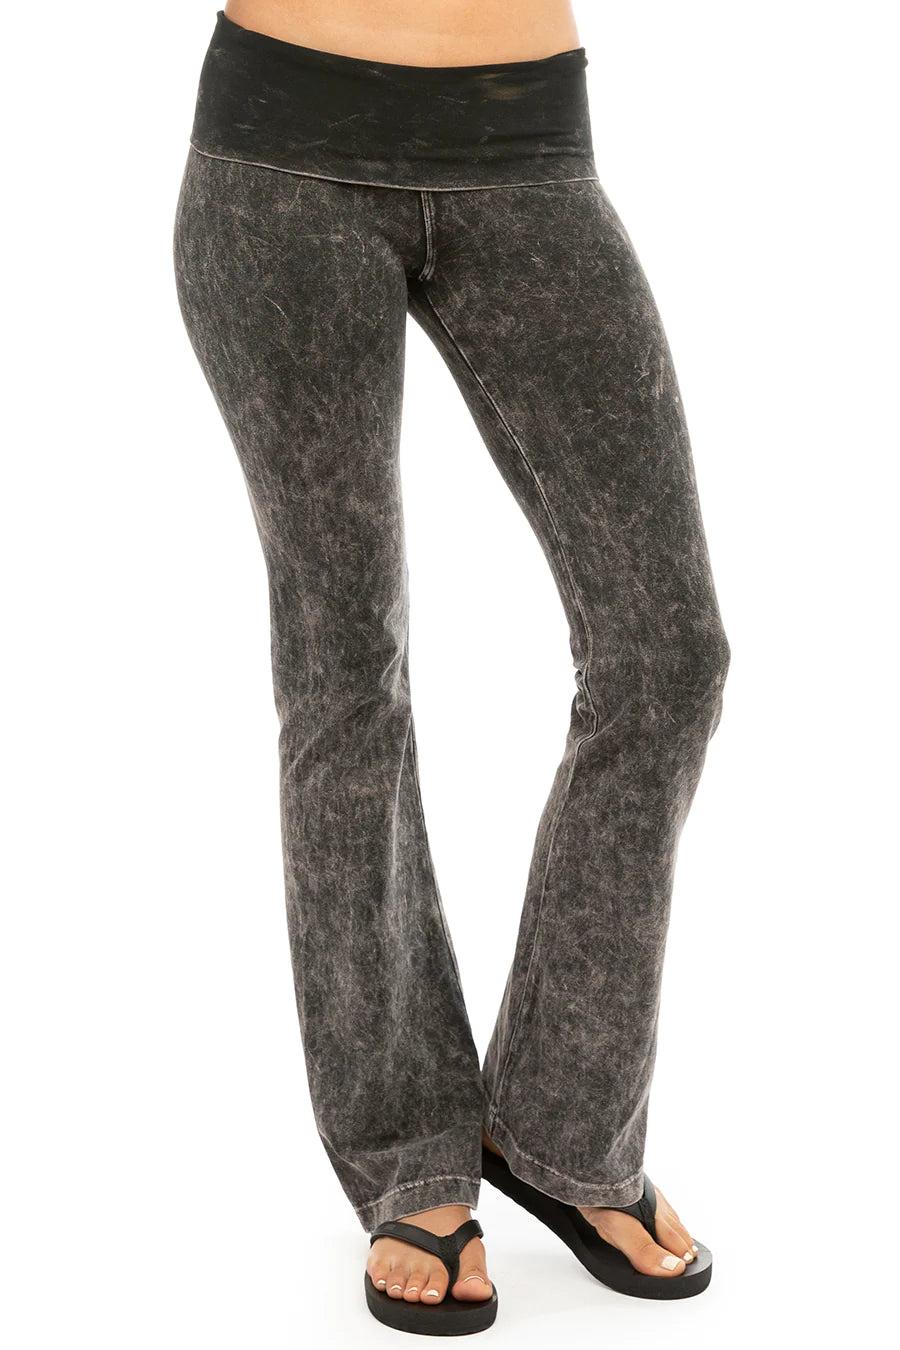 Hard Tail Rolldown Bootleg Flare Pant in Mineral Black